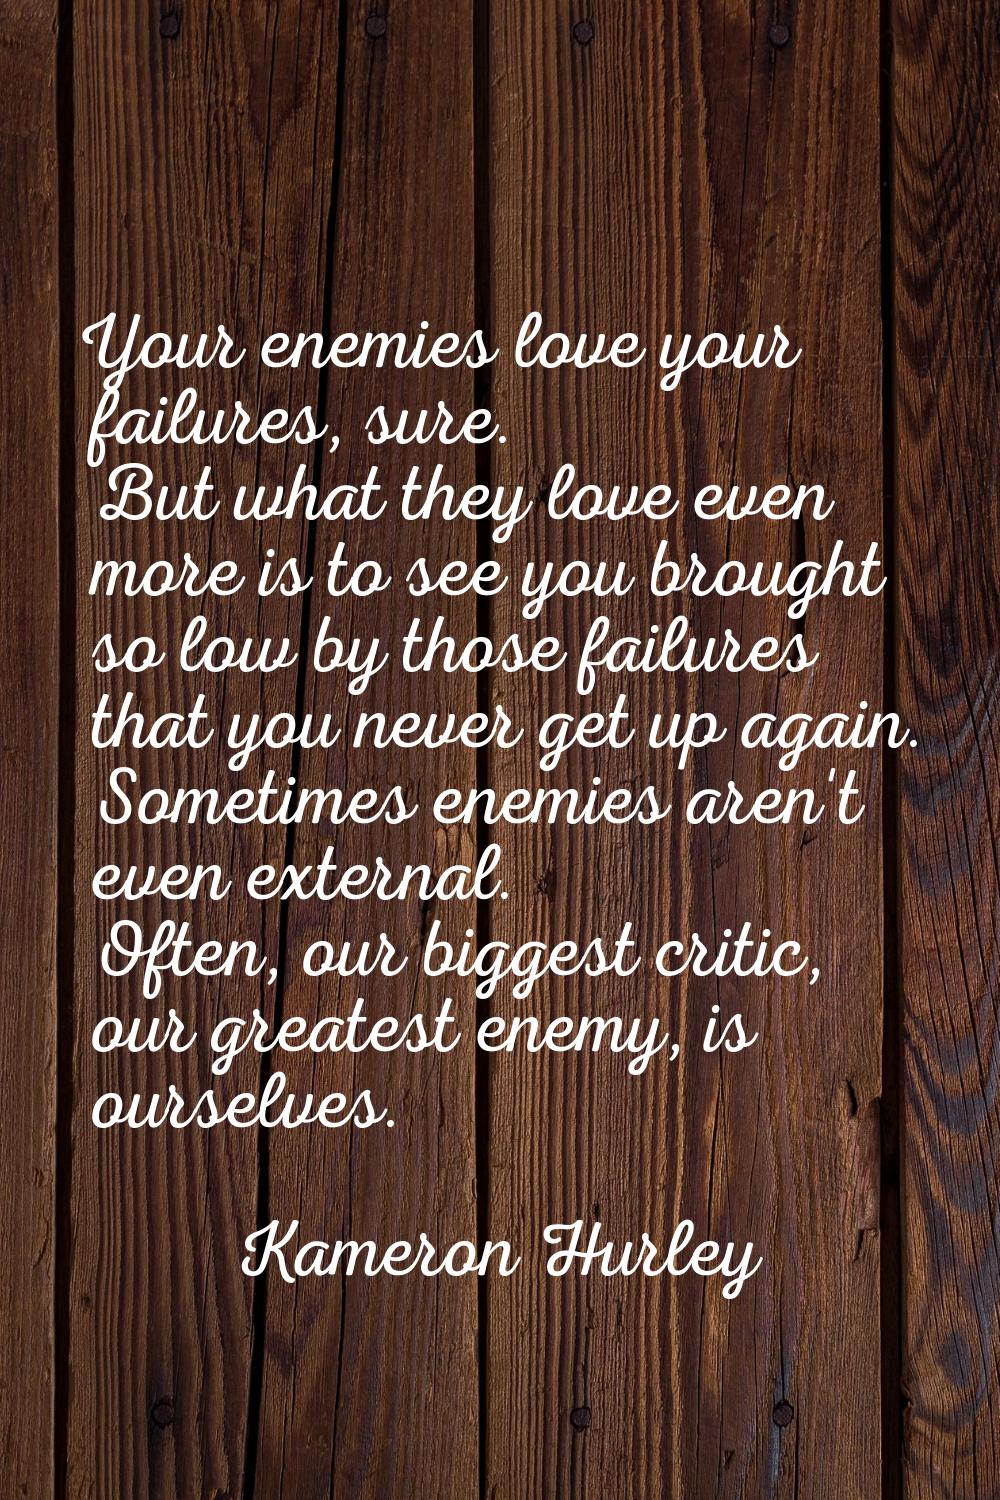 Your enemies love your failures, sure. But what they love even more is to see you brought so low by